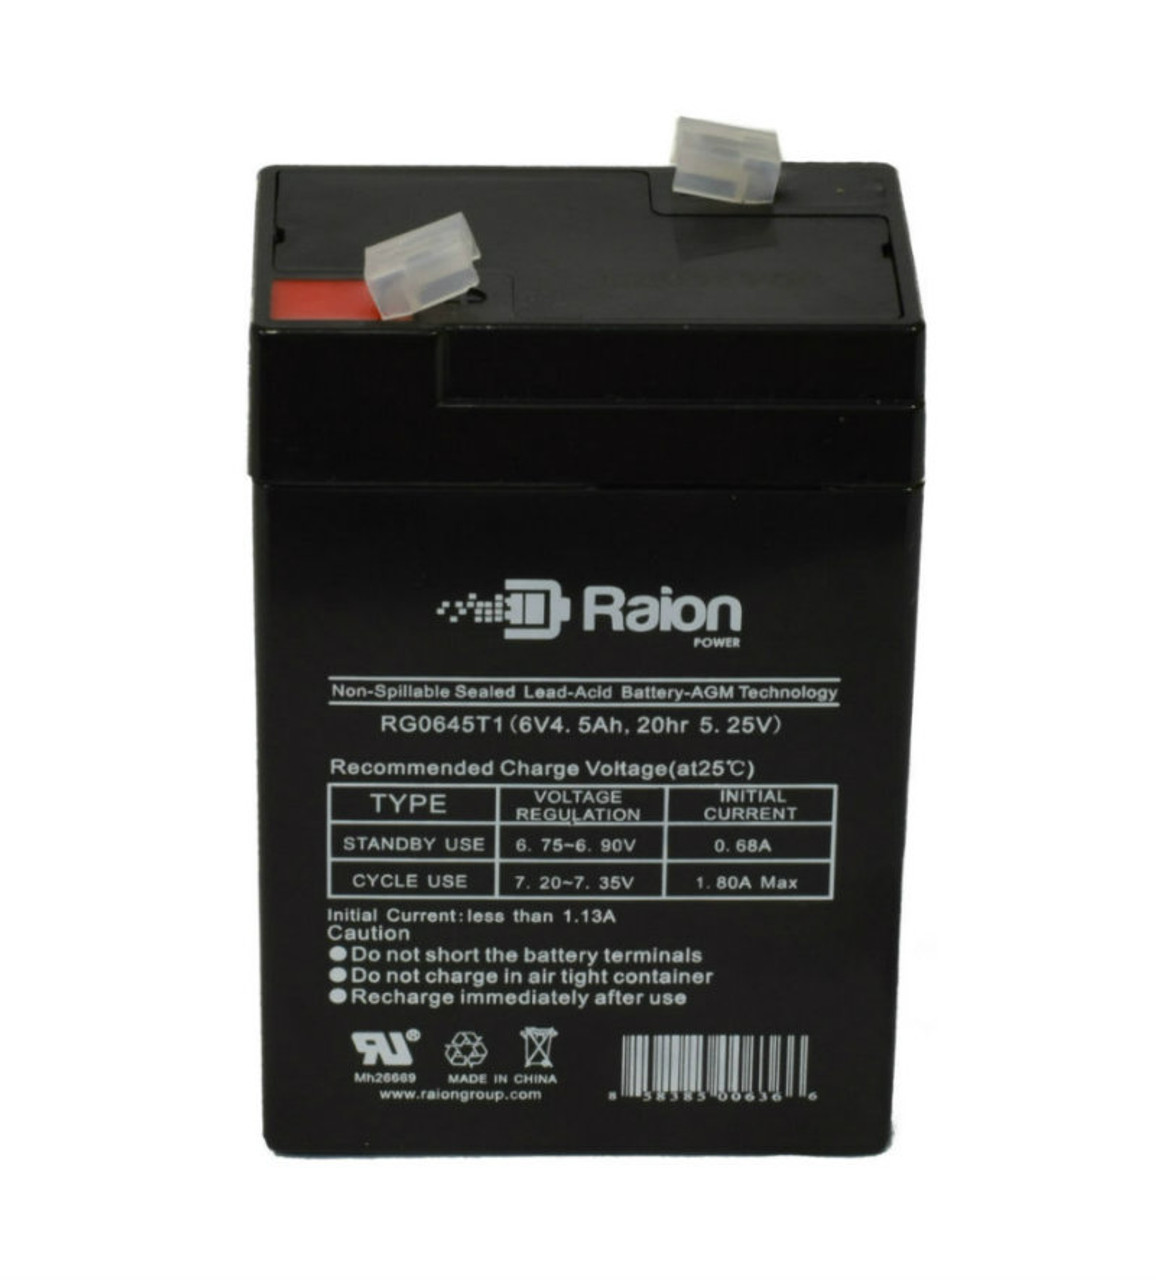 Raion Power RG0645T1 Replacement Battery Cartridge for Peg Perego IGED1044 6V Barbie Scooter